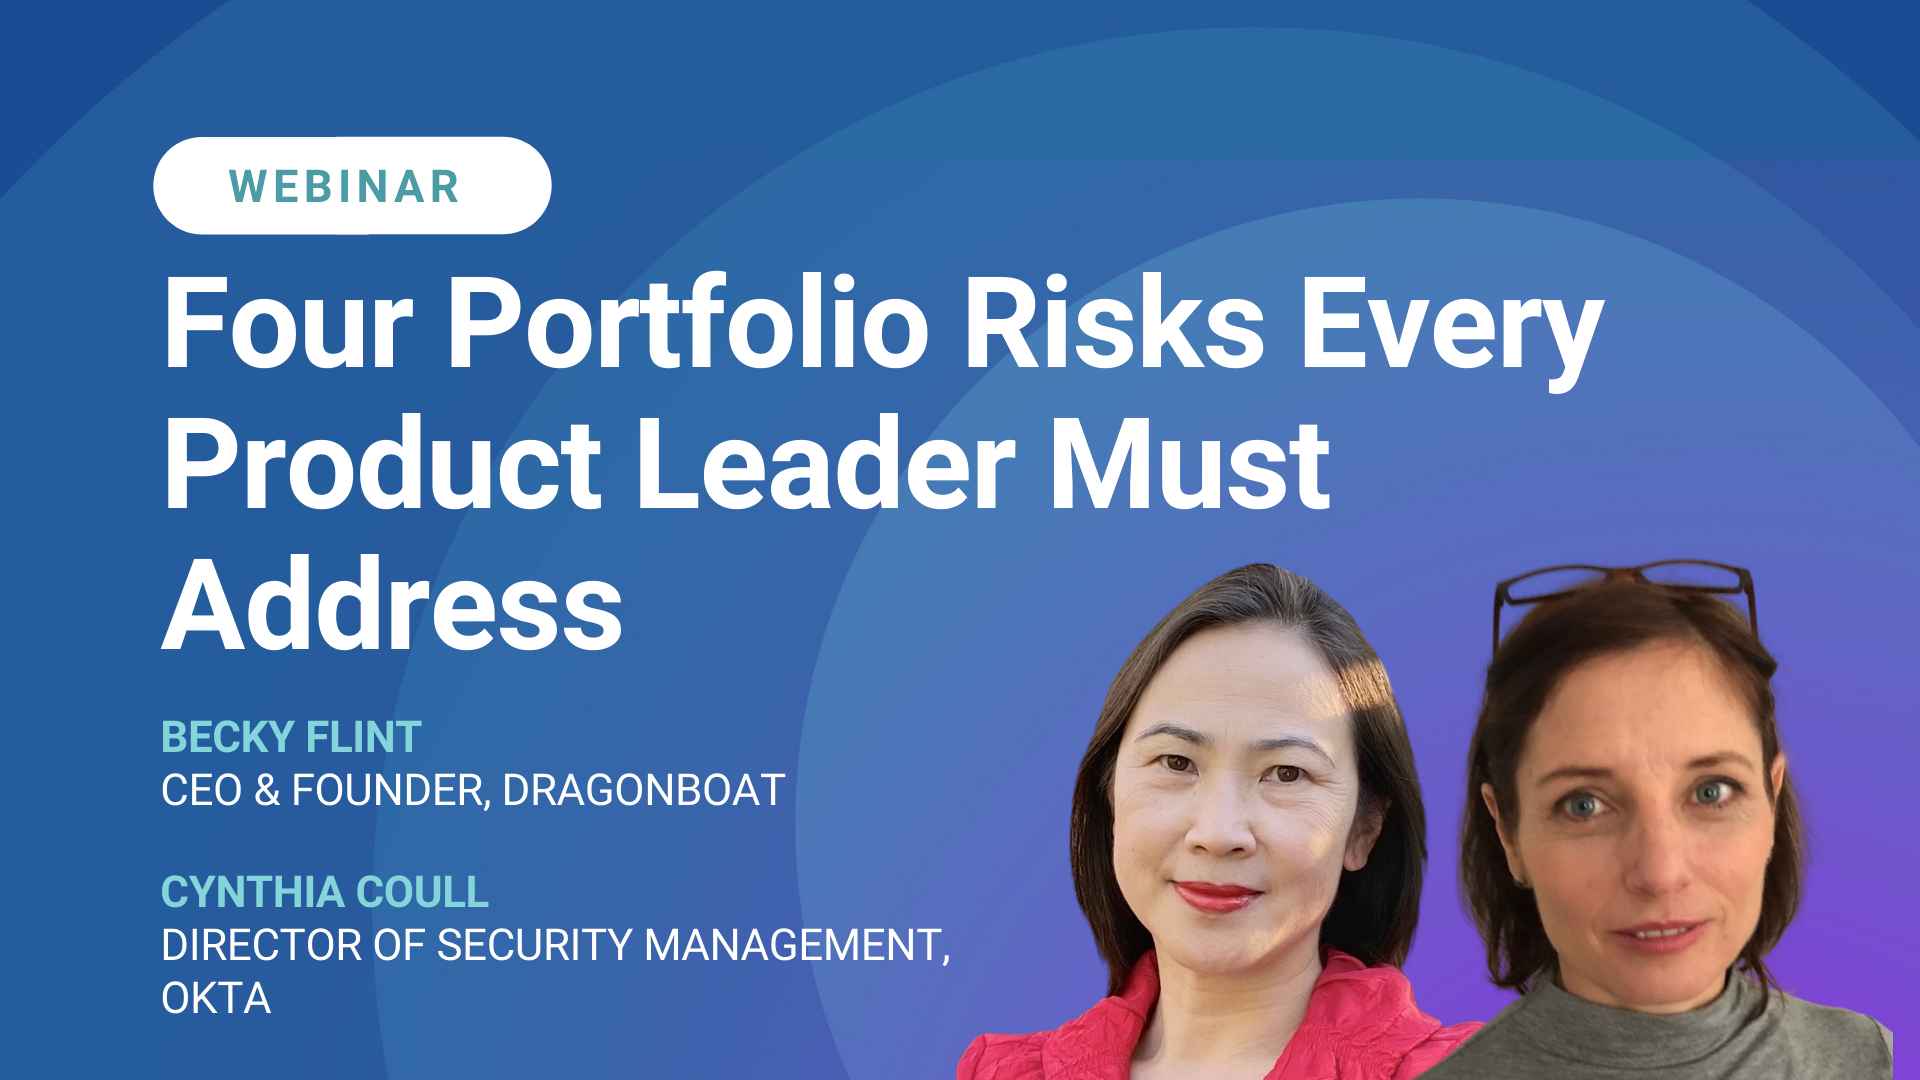 Four Portfolio Risks Every Product Leader Must Address